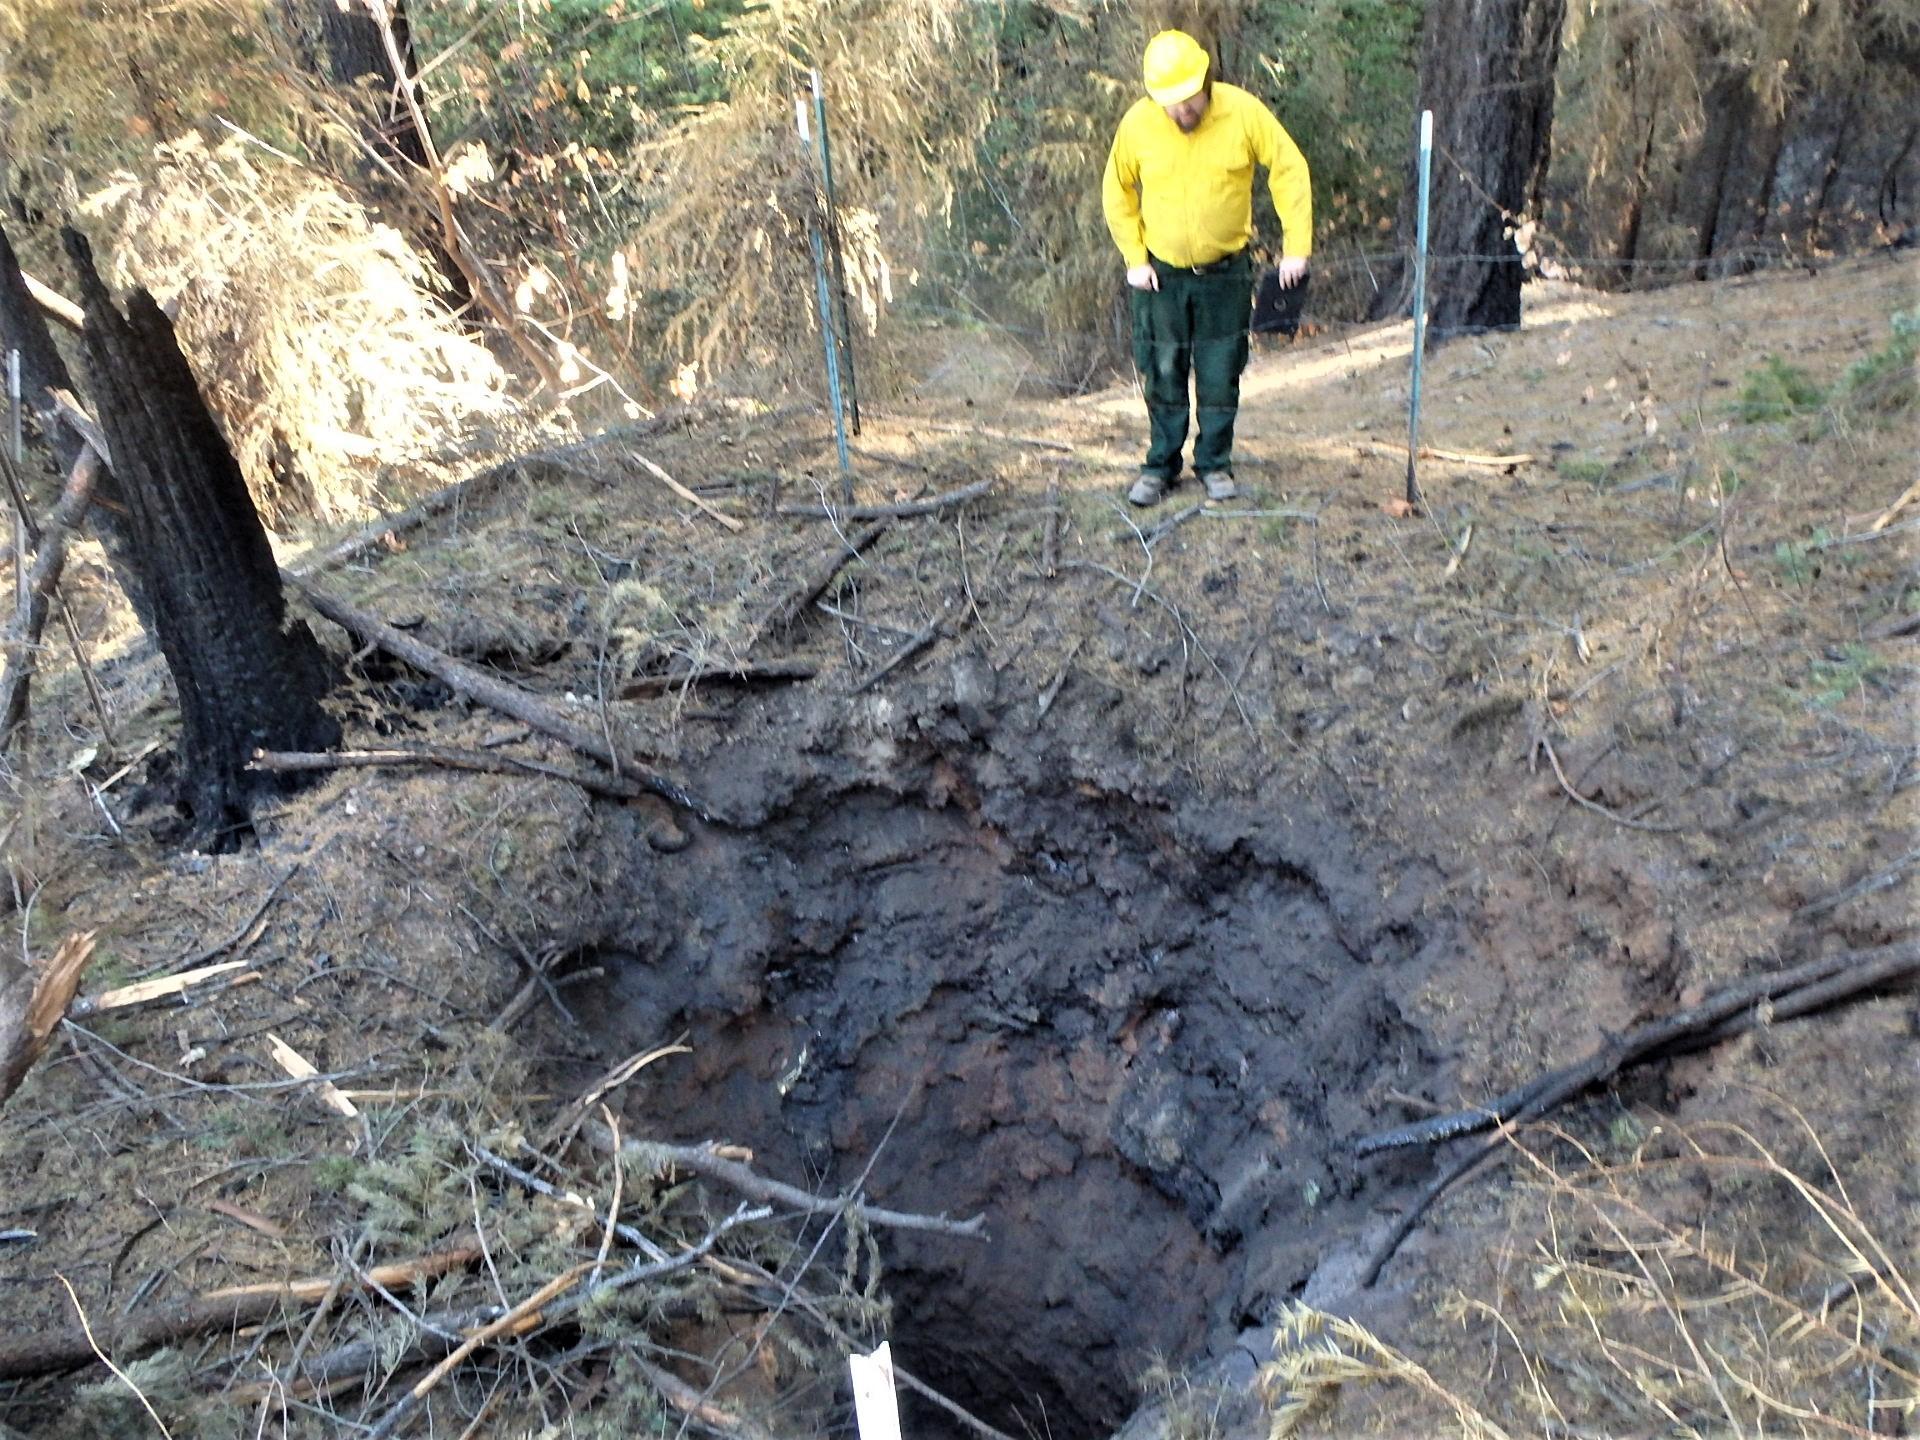 Image showing BAER abandoned mine specialist Jeremy Olsen assessing a burned over mine shaft in the Mosquito burned area